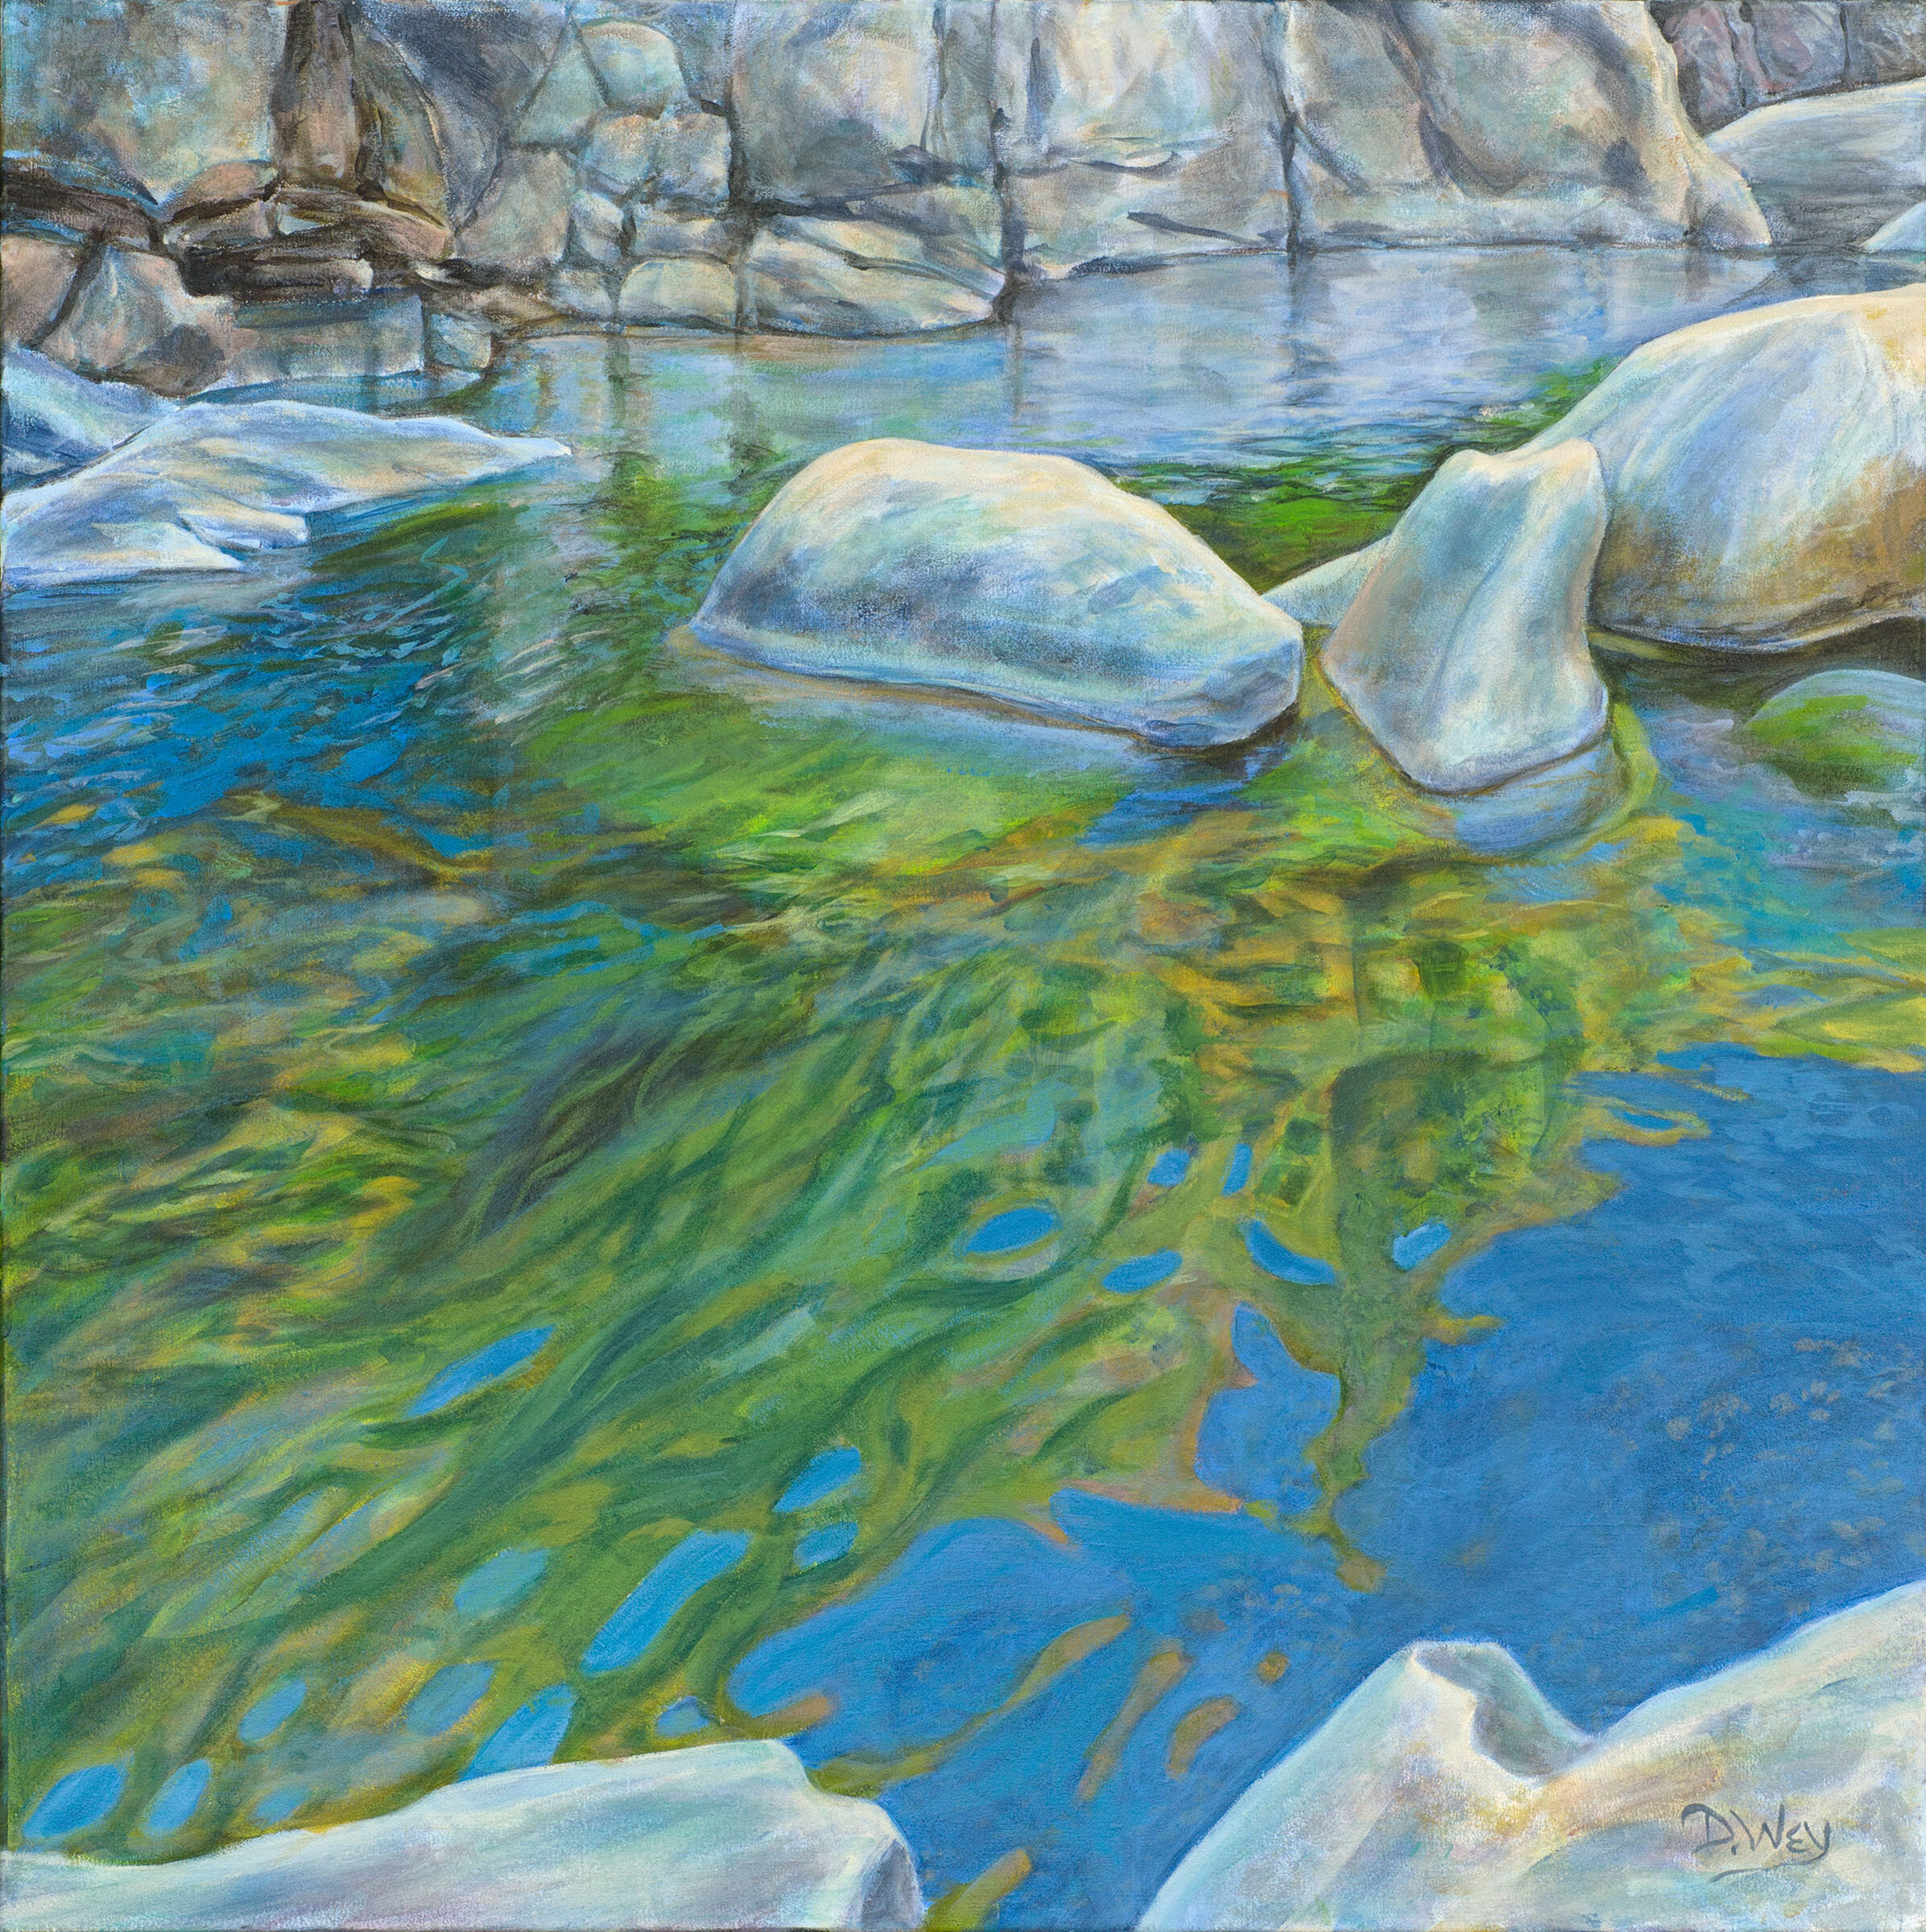 RIVER REFLECTIONS, Acrylic, 36” X 36” $2500